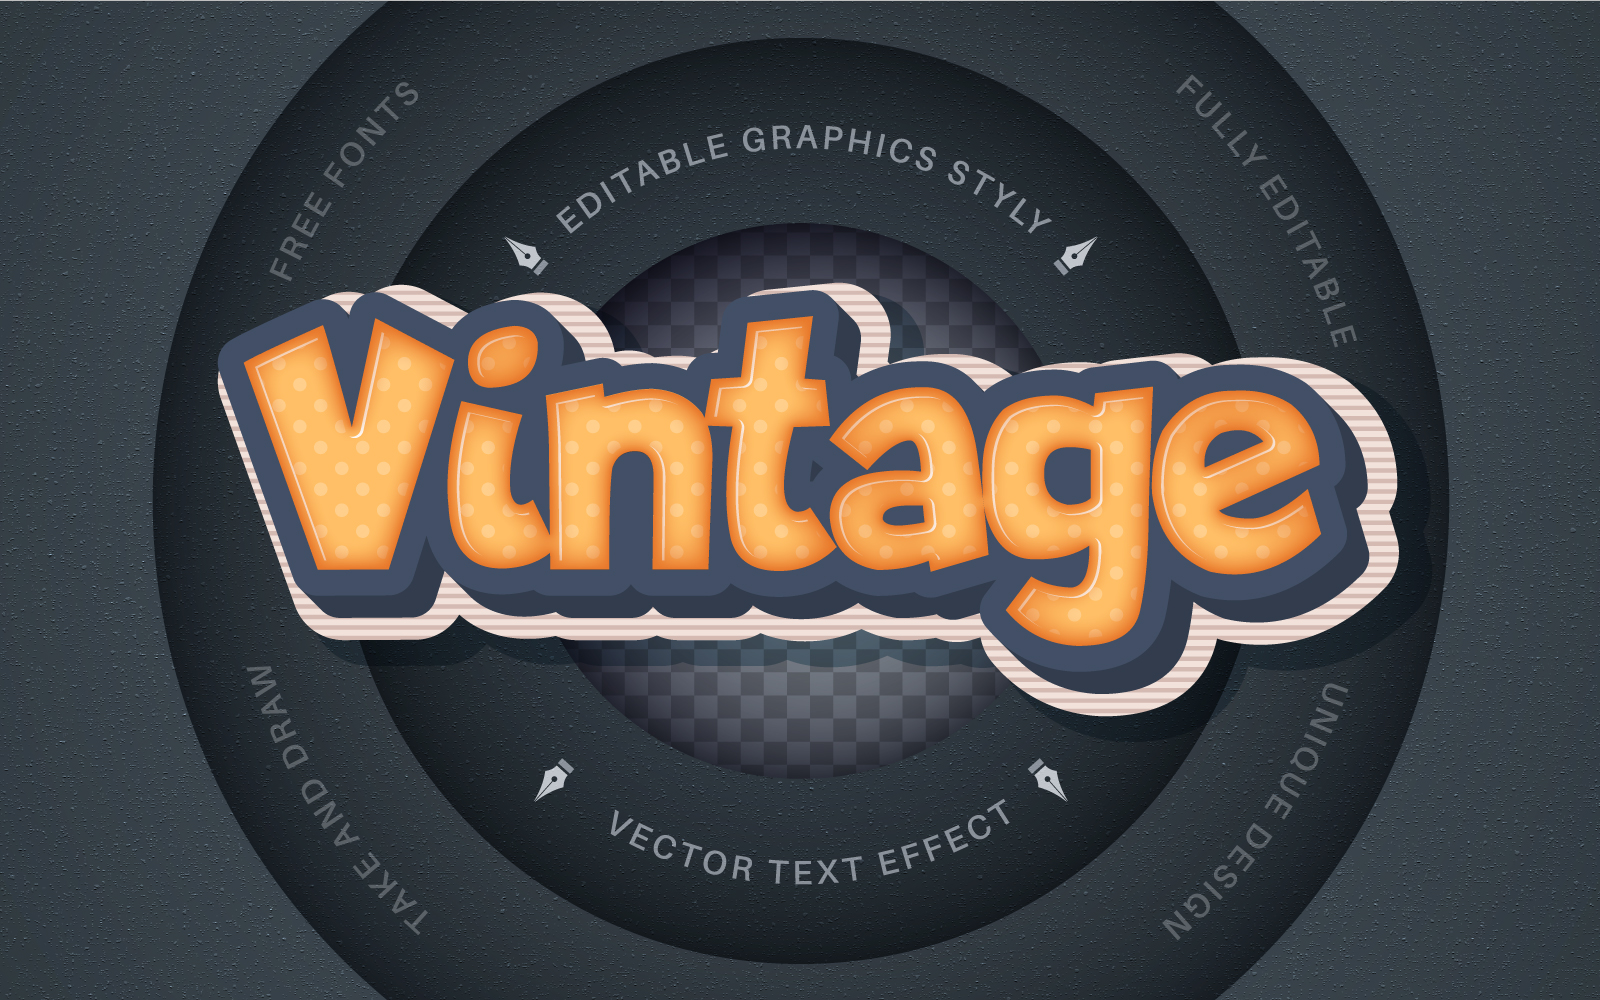 Old Vintage - Editable Text Effect, Font Style, Graphics Illustration